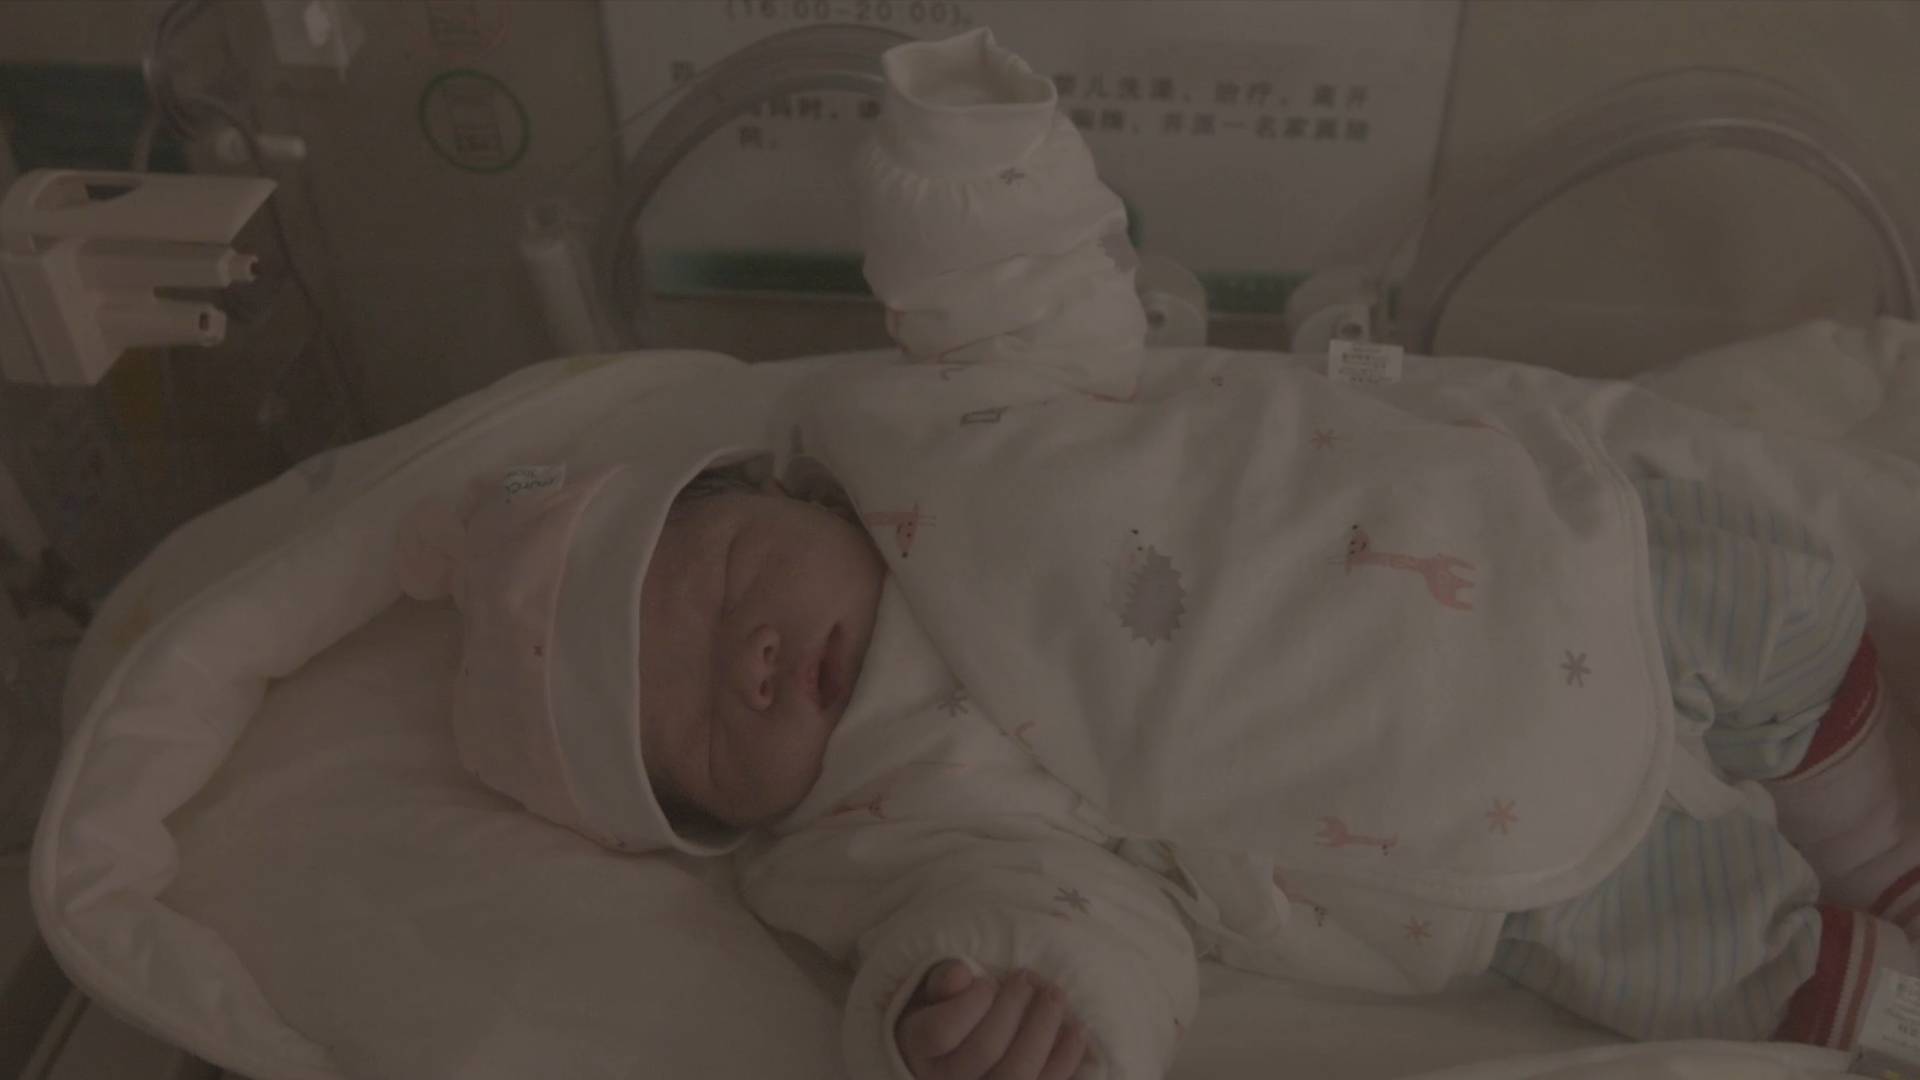 GLOBALink | China's first heart-lung transplant recipient gives birth to baby girl